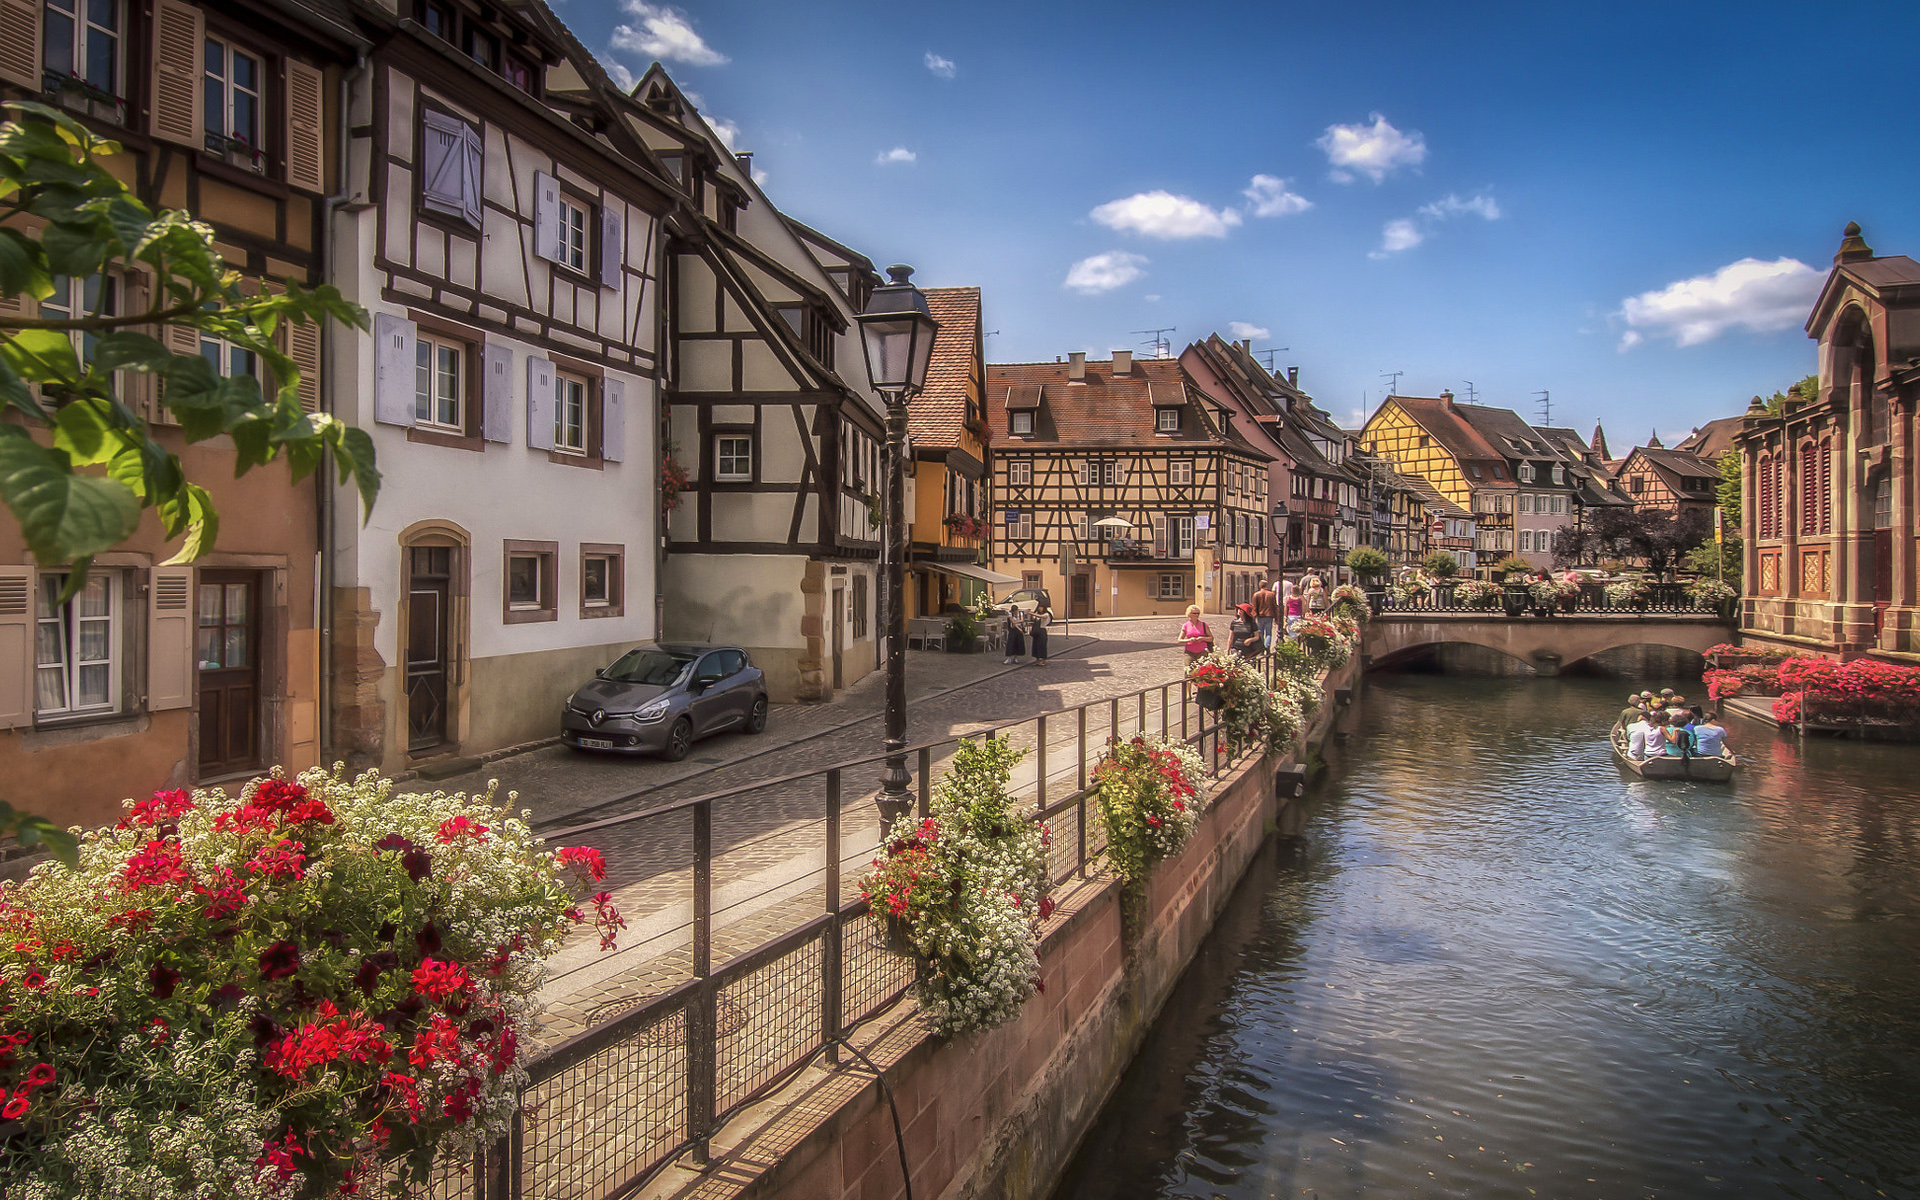 Download wallpaper Colmar, summer, houses, canal, Alsace